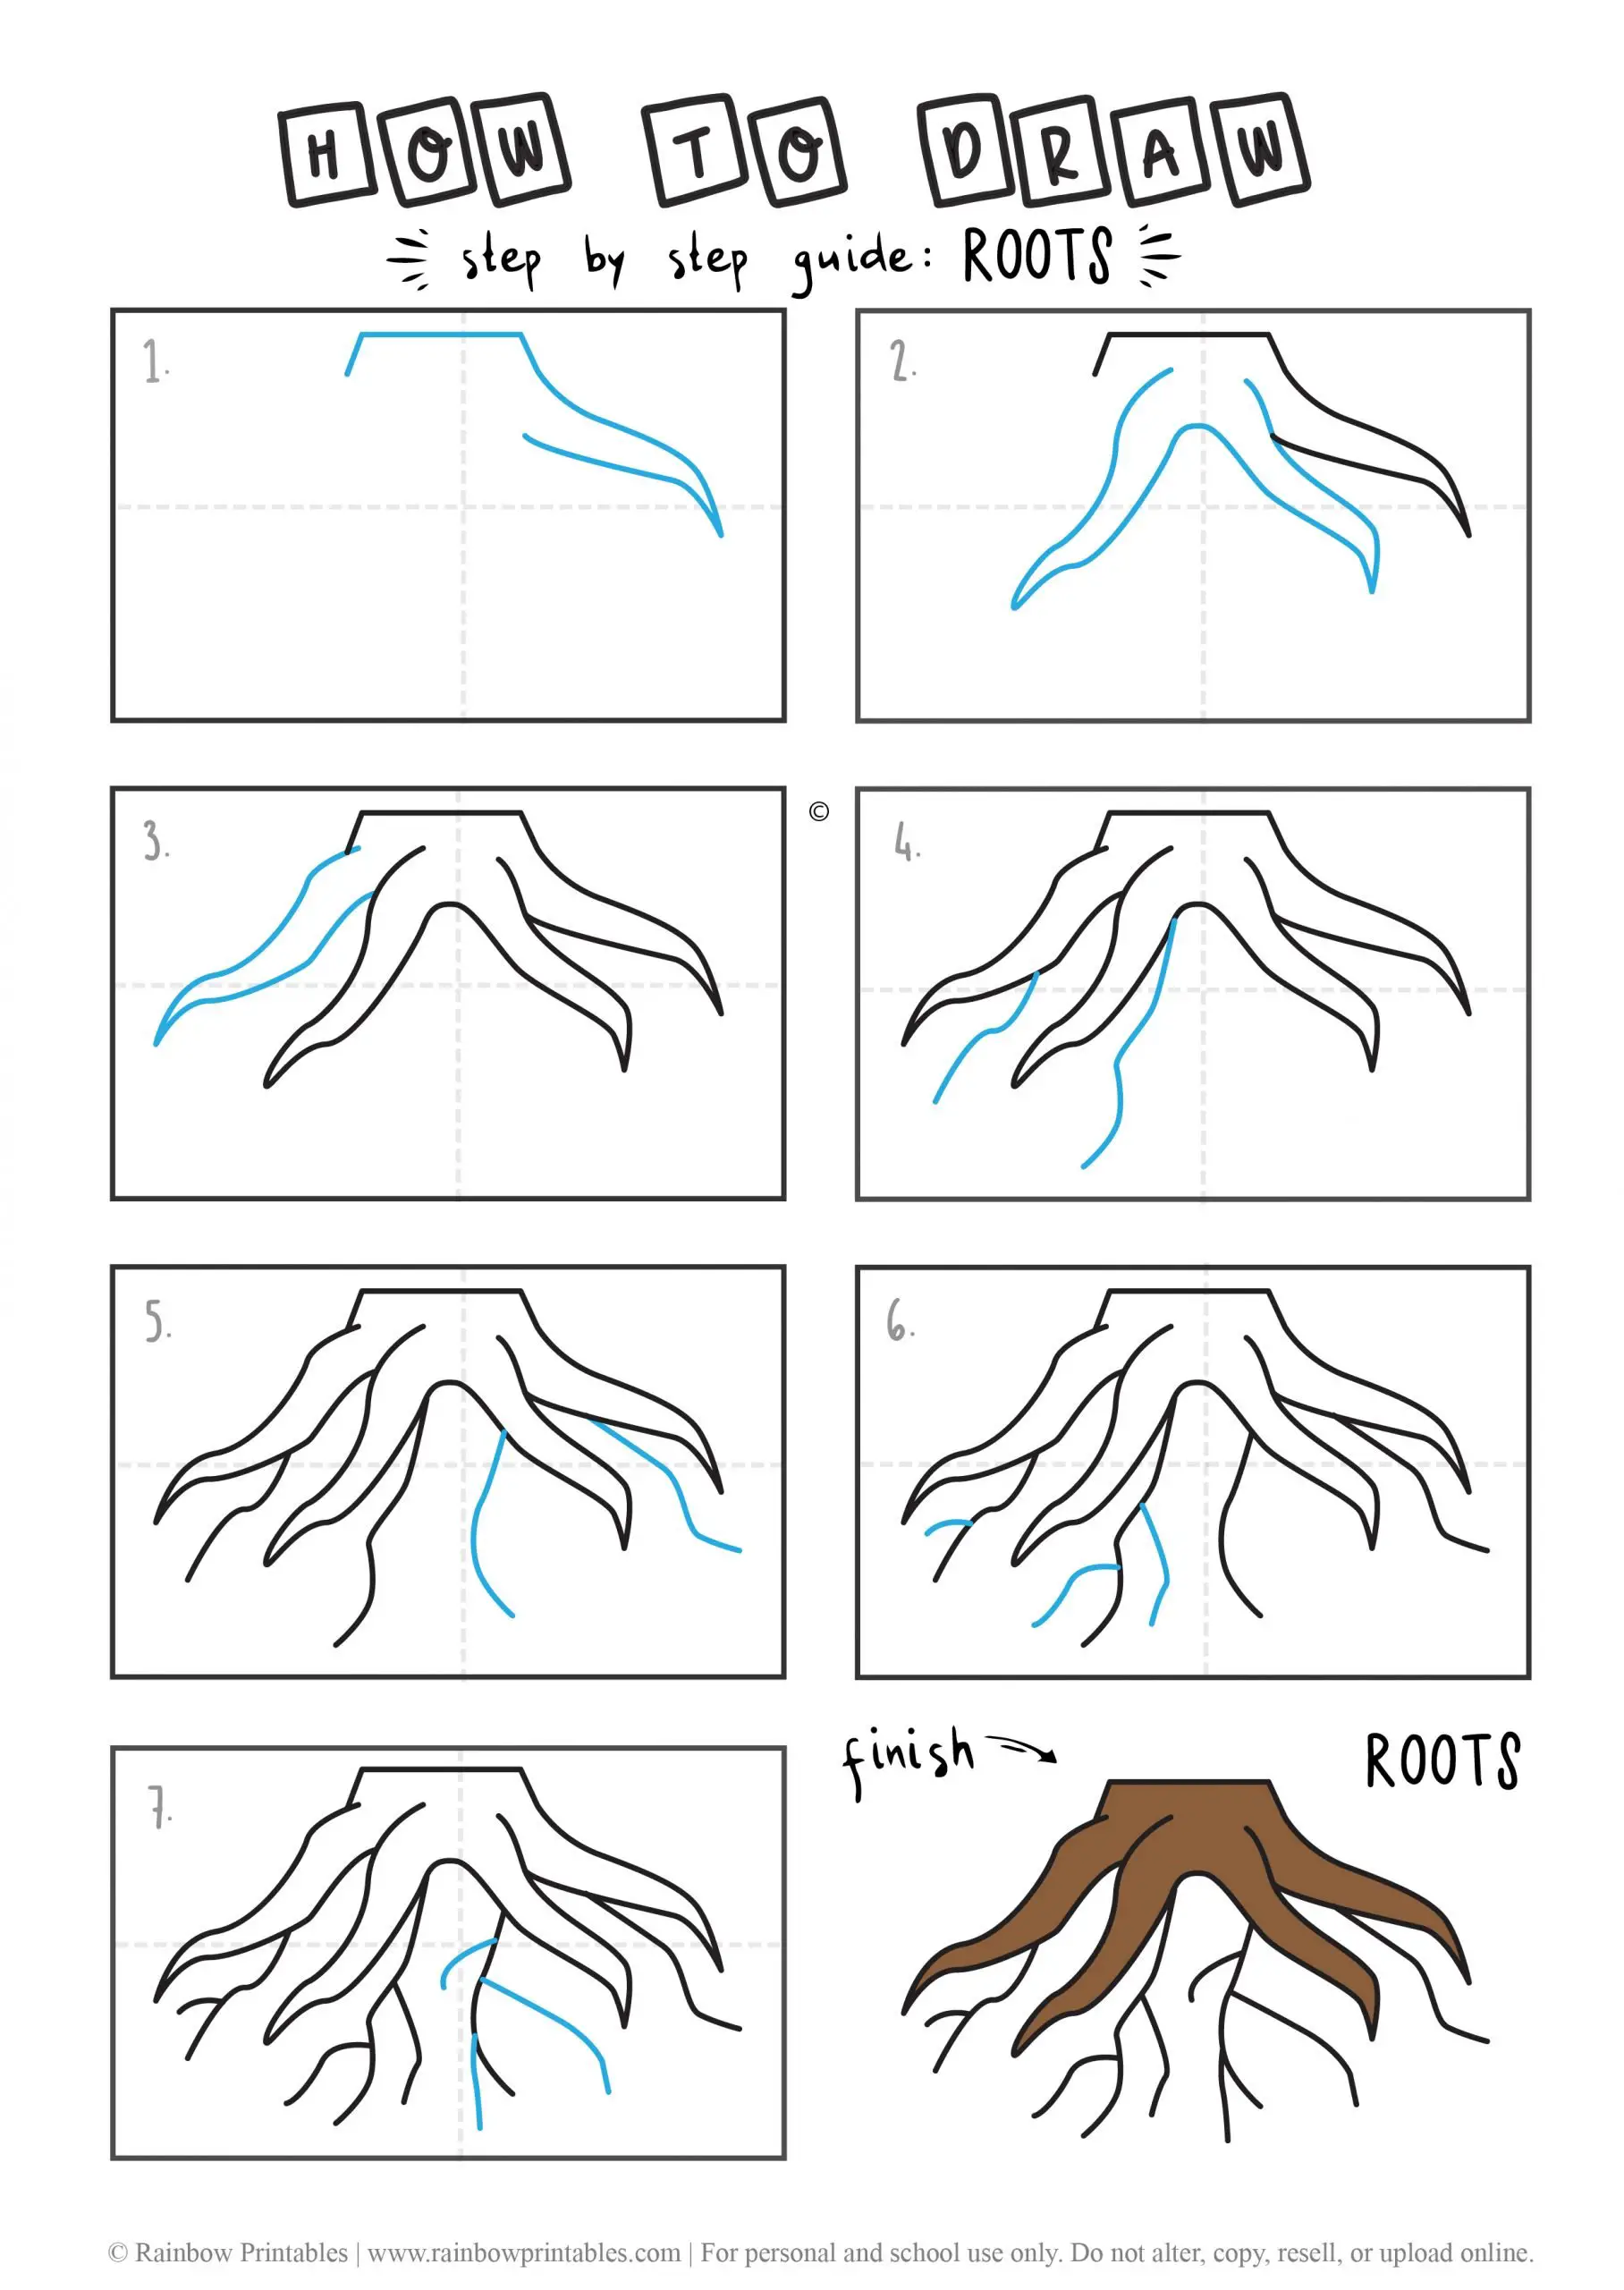 HOW TO DRAW TREE ROOTS PLANT NATURE GUIDE ILLUSTRATION STEP BY STEP EASY SIMPLE FOR KIDS